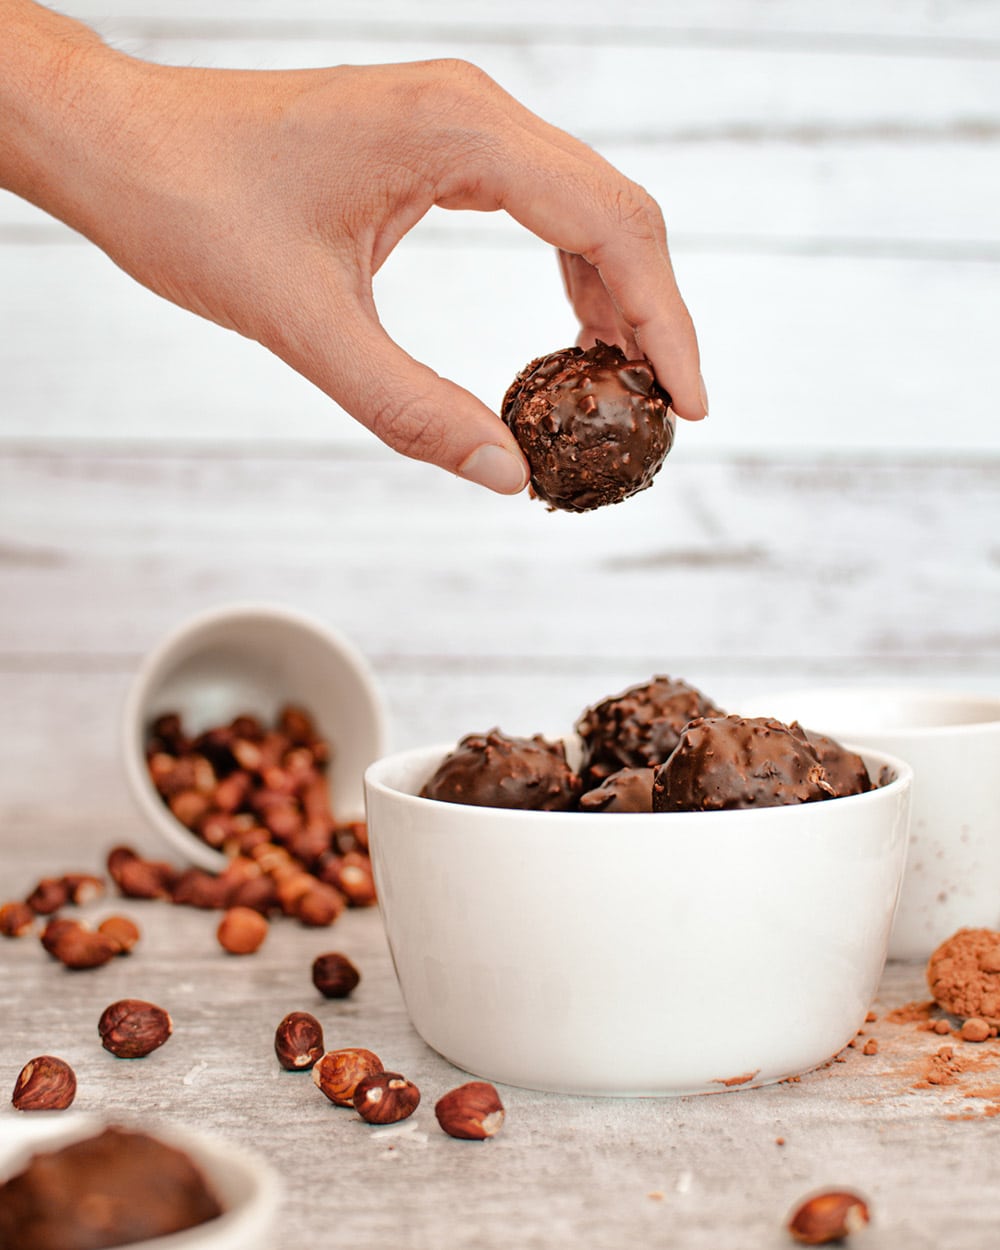 Holding a date ball above other coconut balls and hazelnuts in the background.